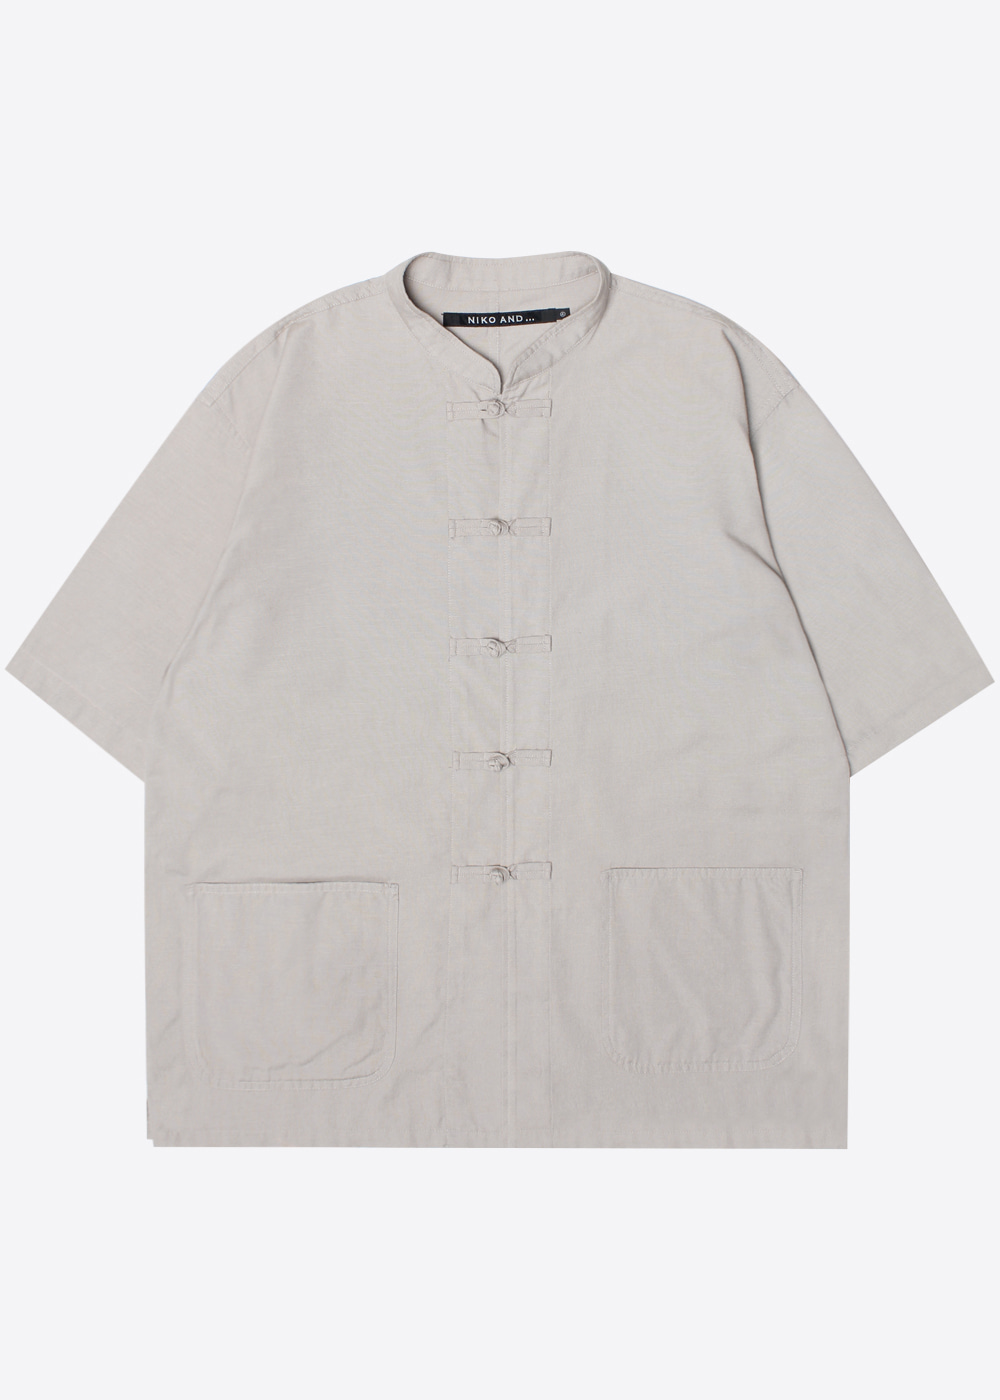 NIKO AND’over fit’ linen chinese traditional shirt